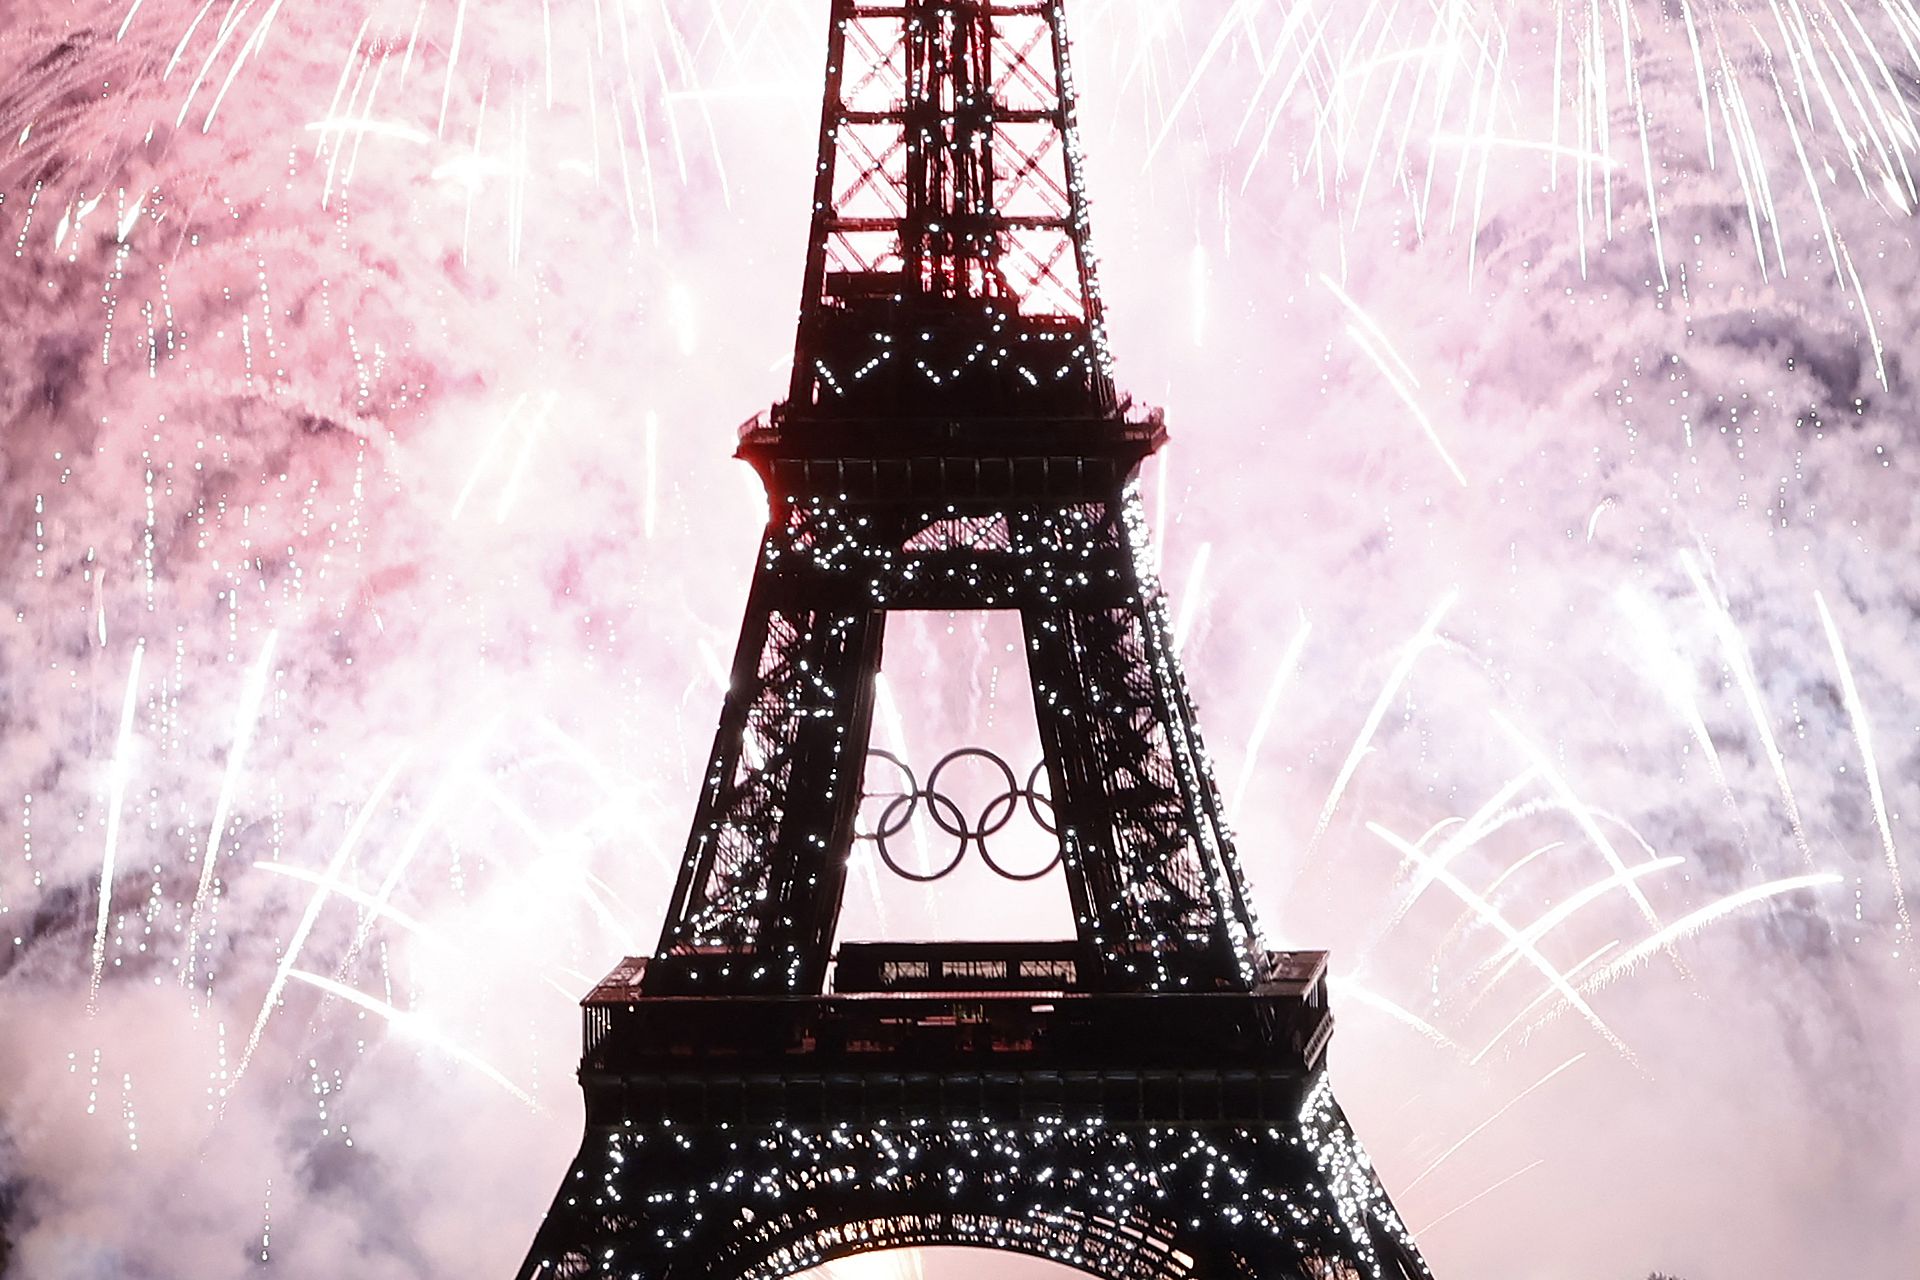 Paris will equal which city’s record for hosting the summer games in 2024?